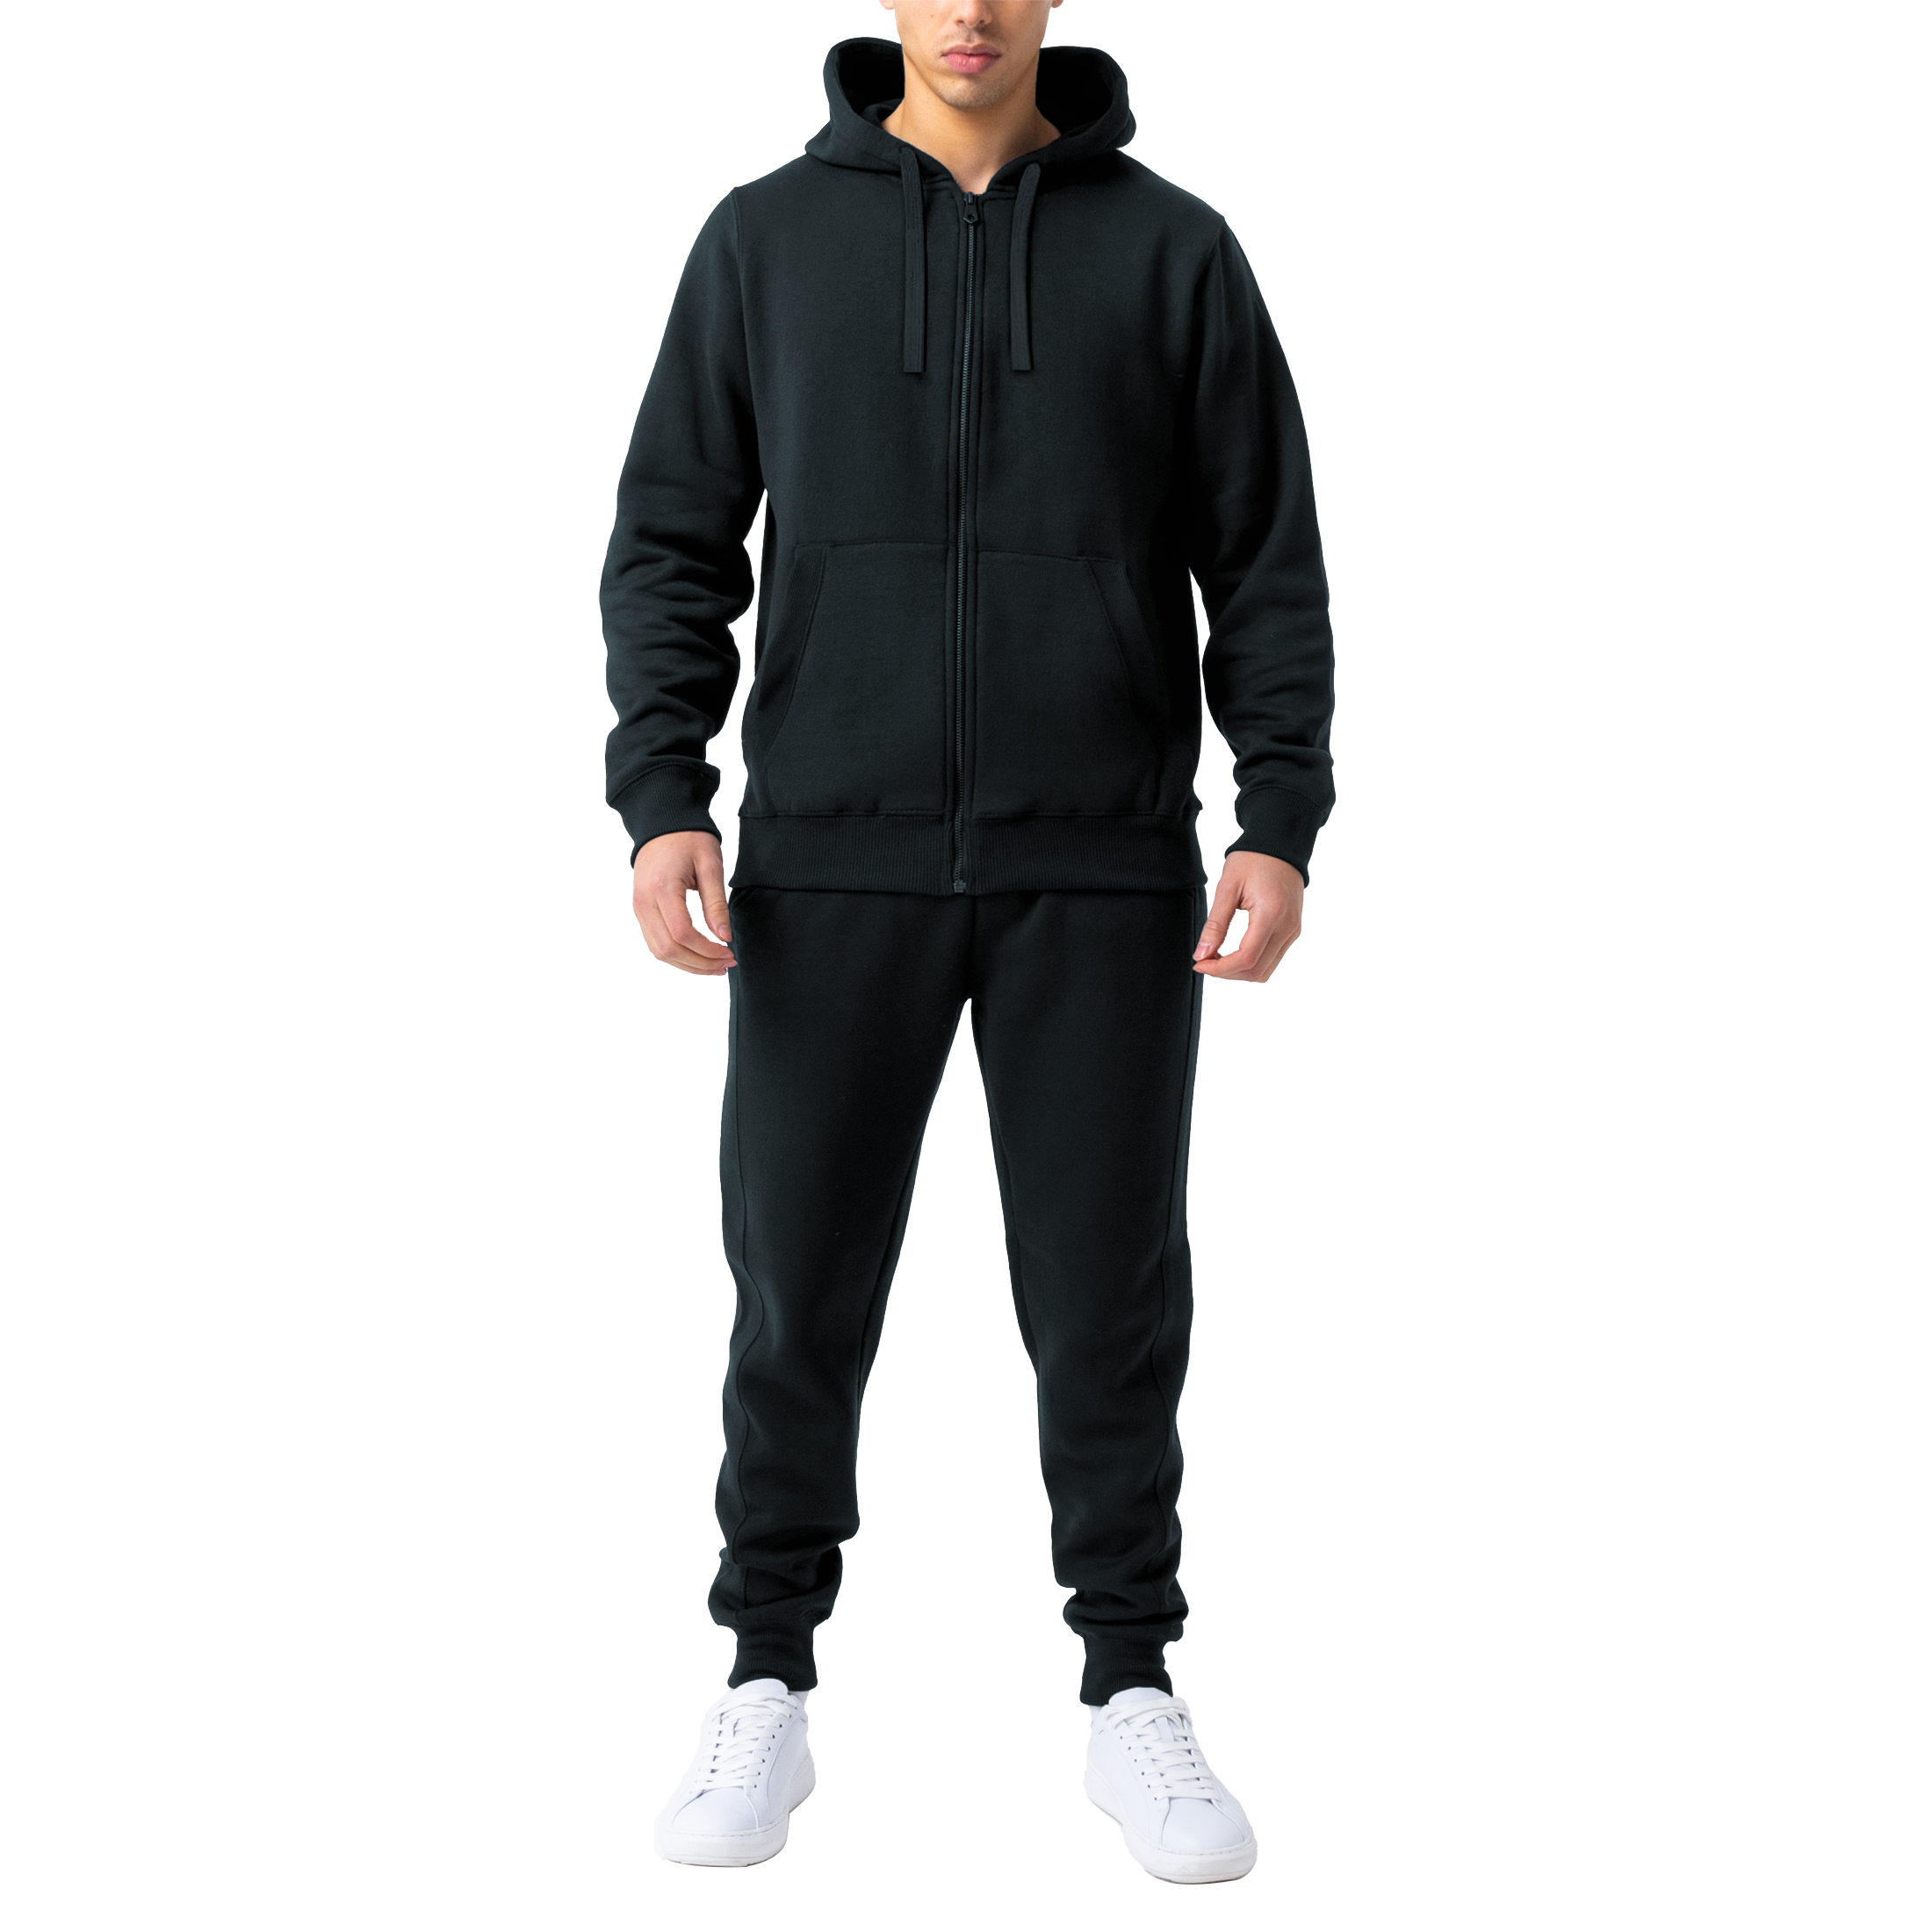 Men's Casual Jogging Athletic Active Full Zip Up Tracksuit - Black, Large